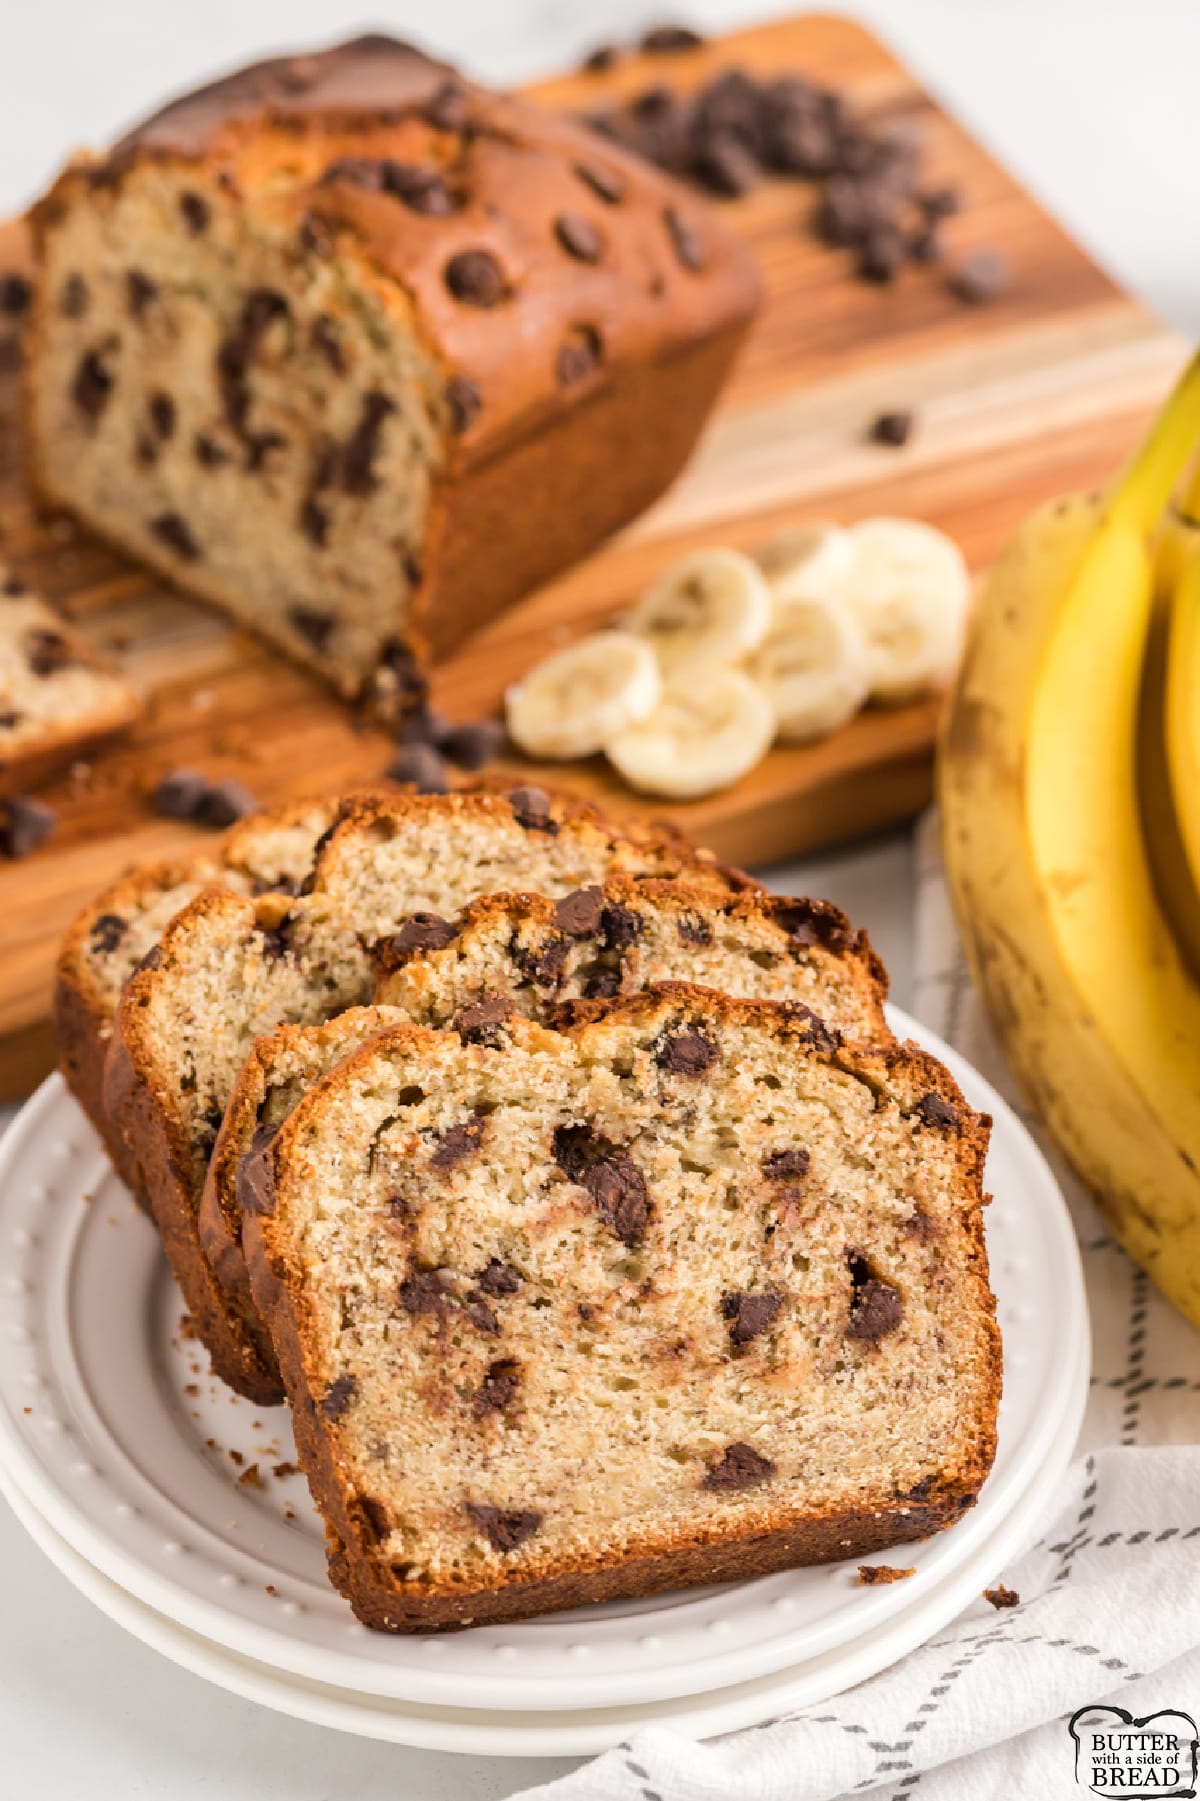 Chocolate Chip Banana Bread made with fresh bananas, chocolate chips and sour cream. Moist and delicious banana bread recipe.